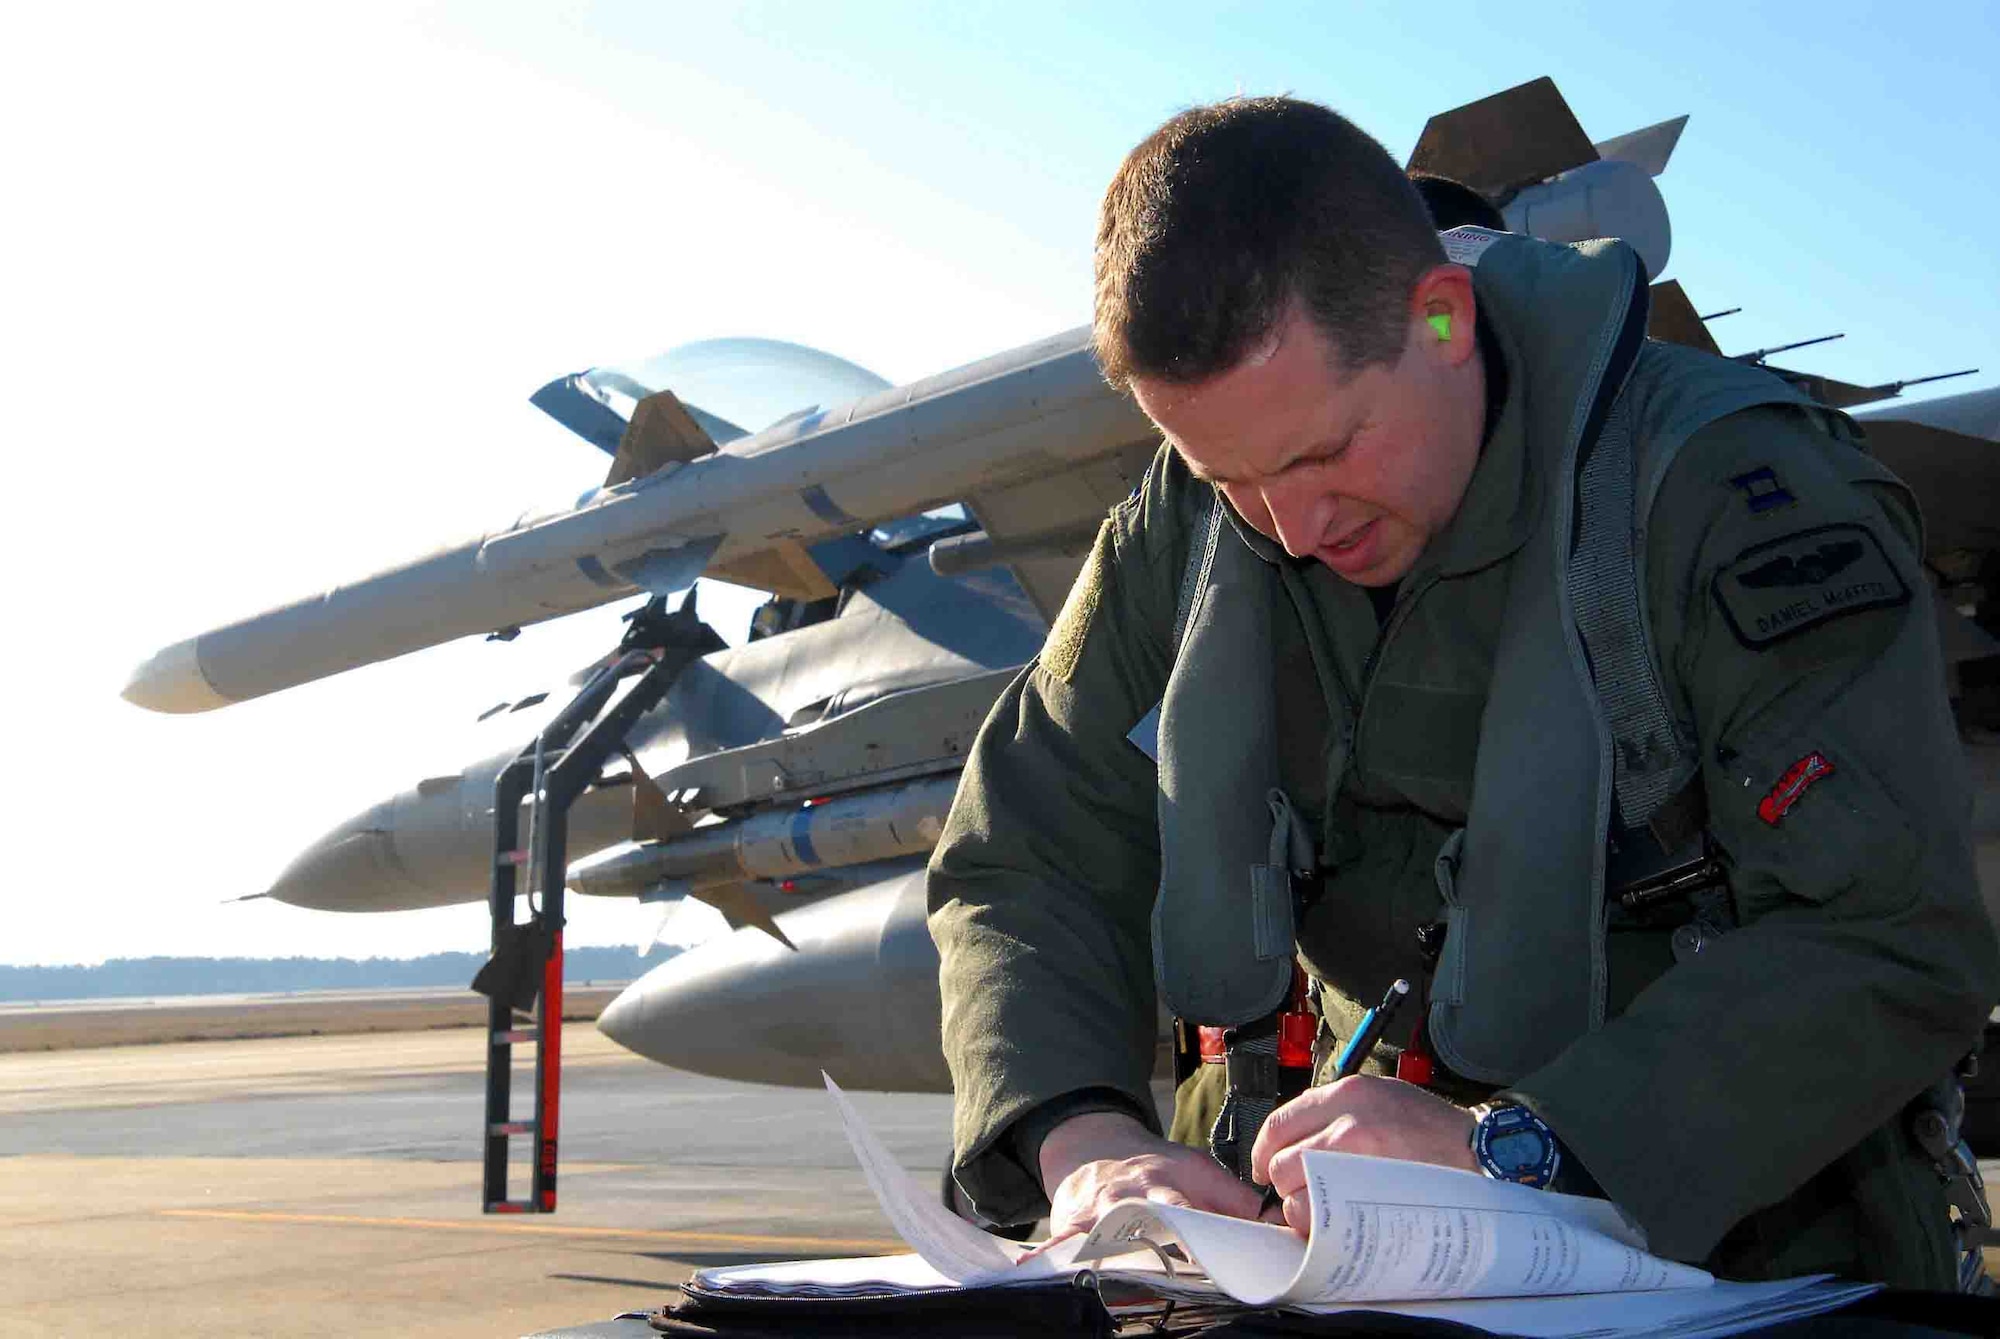 SHAW AIR FORCE BASE, S.C. -- Capt. Daniel McAffee, 77th Fighter Squadron, makes a note in the flight log before piloting an F-16CJ during the Operation Iron Thunder exercise Feb. 7. The four-day exercise prepares pilots for future contingency operations by exposing them to missions identical to those faced in combat. (U.S. Air Force Photo/Tech. Sgt. James Arrowood)